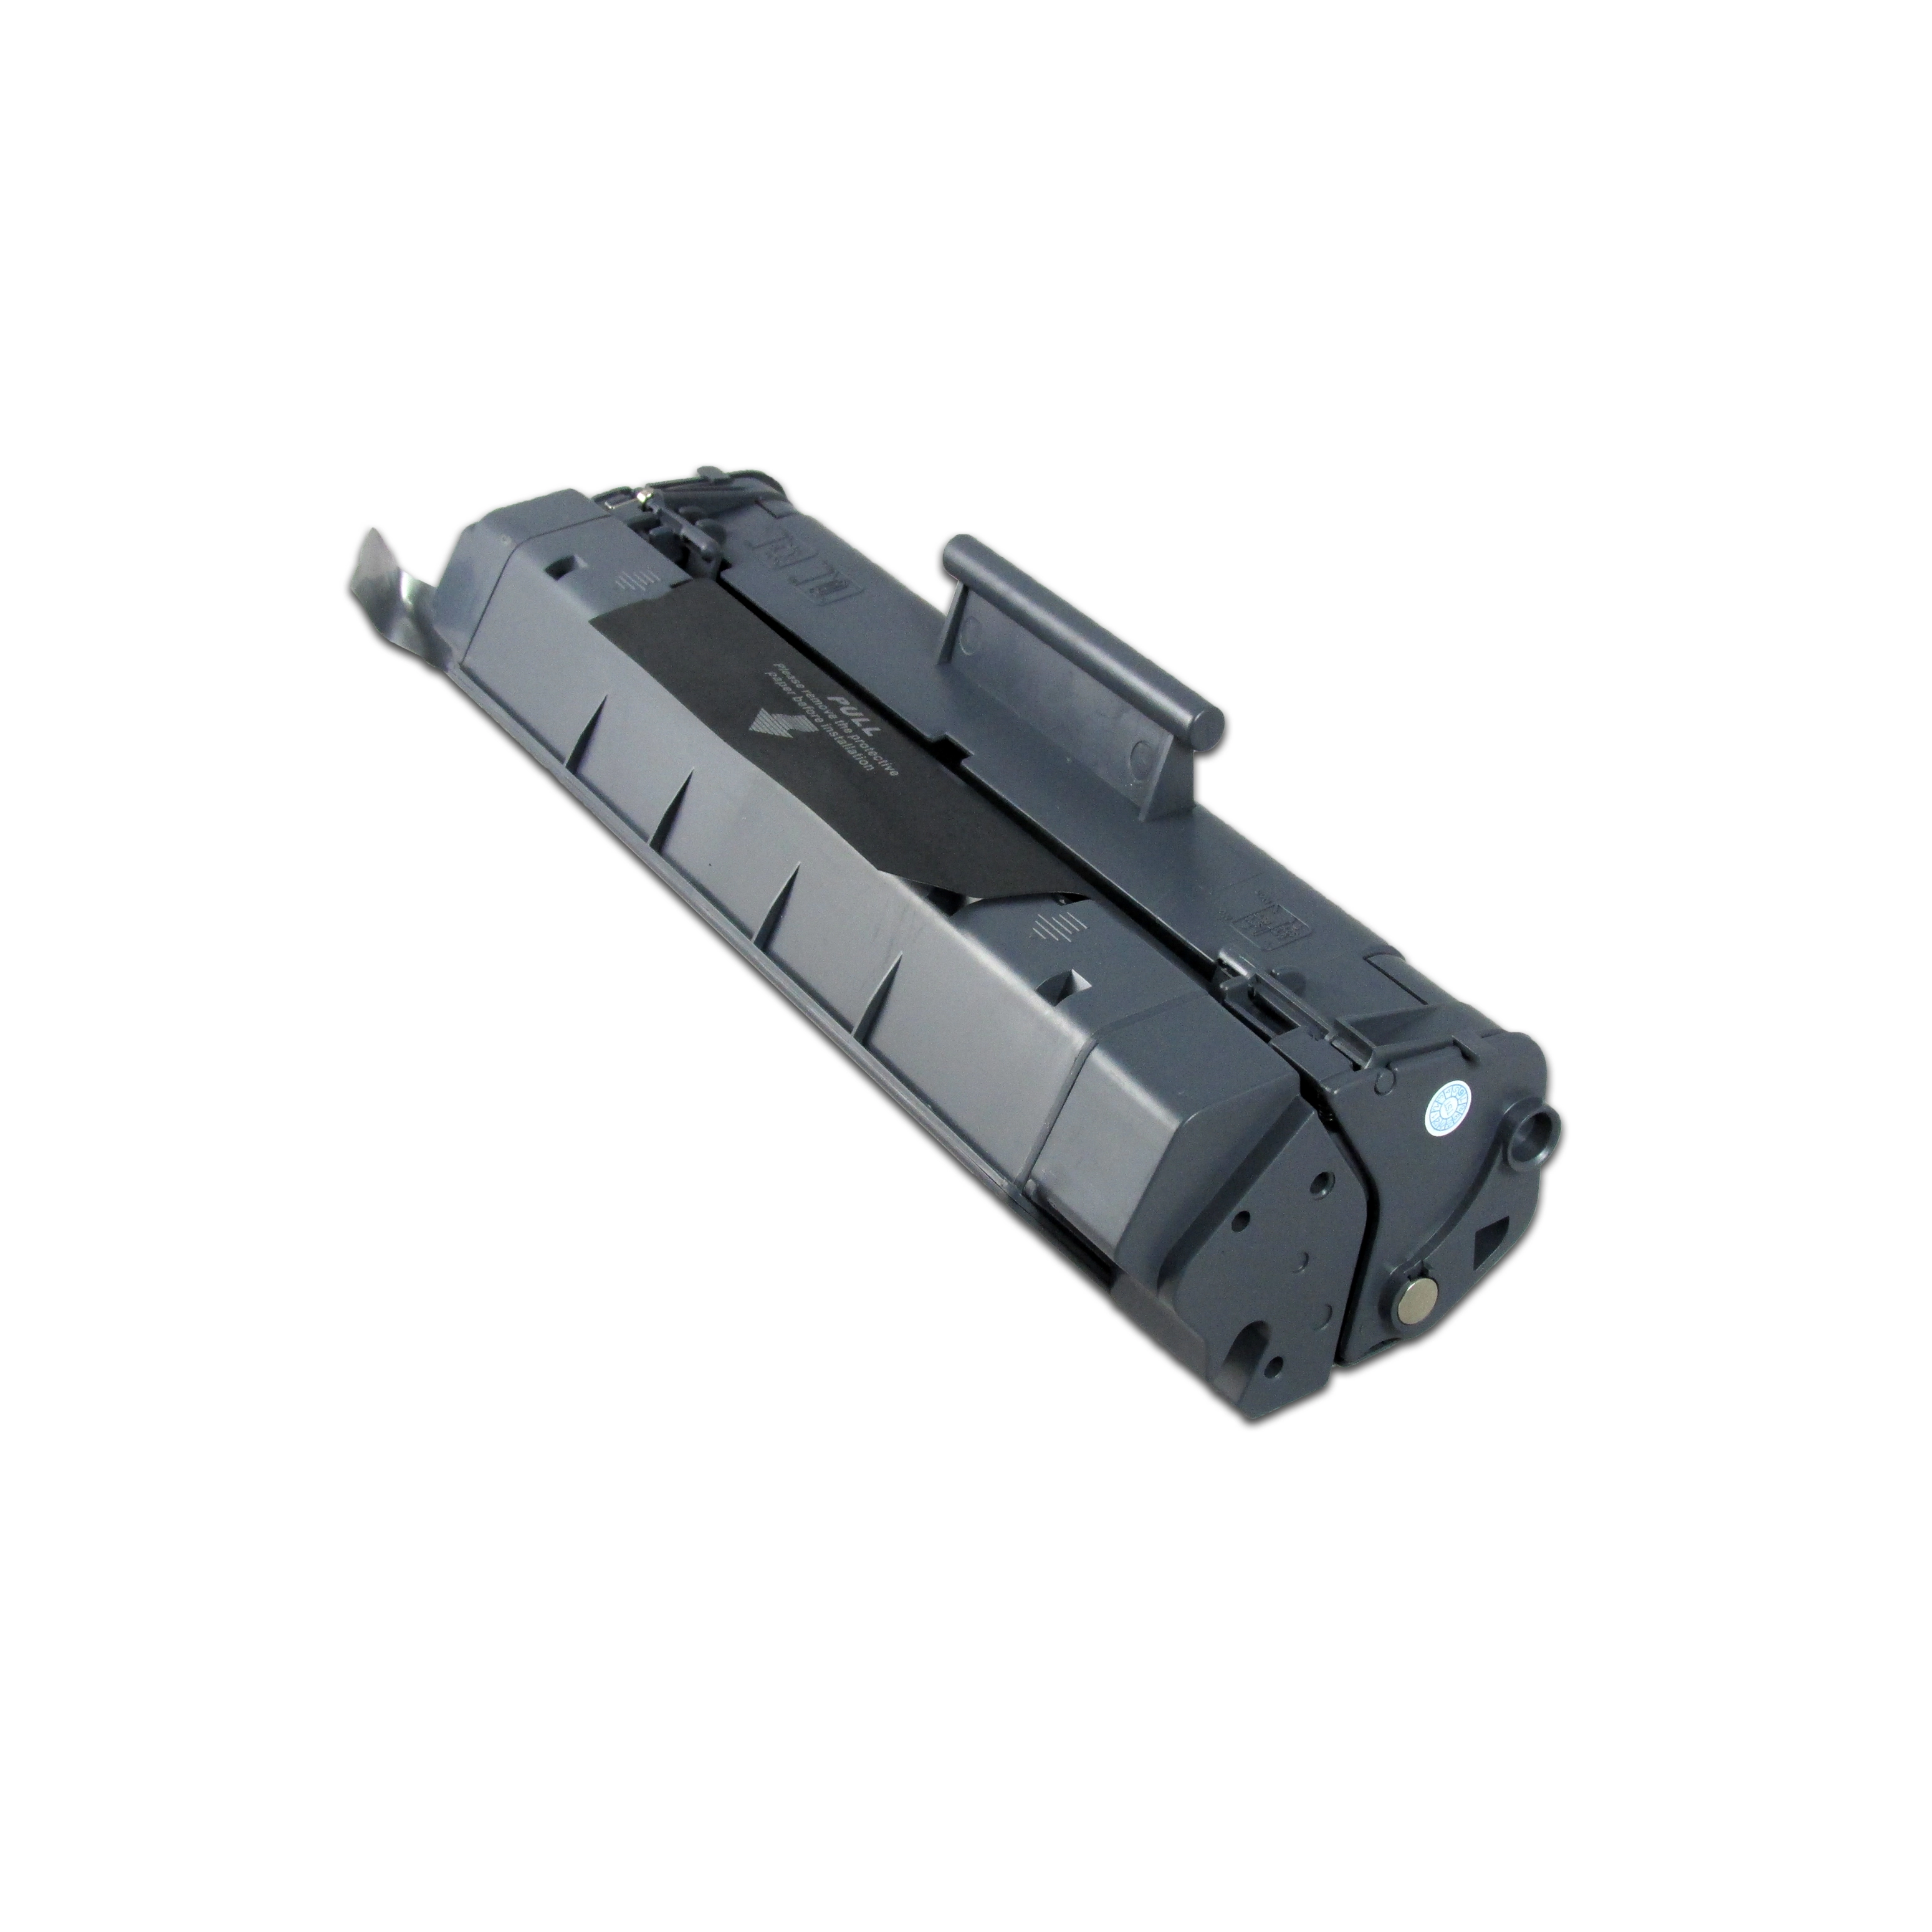 C4092A toner cartridge Use For 1100/1100A/3200